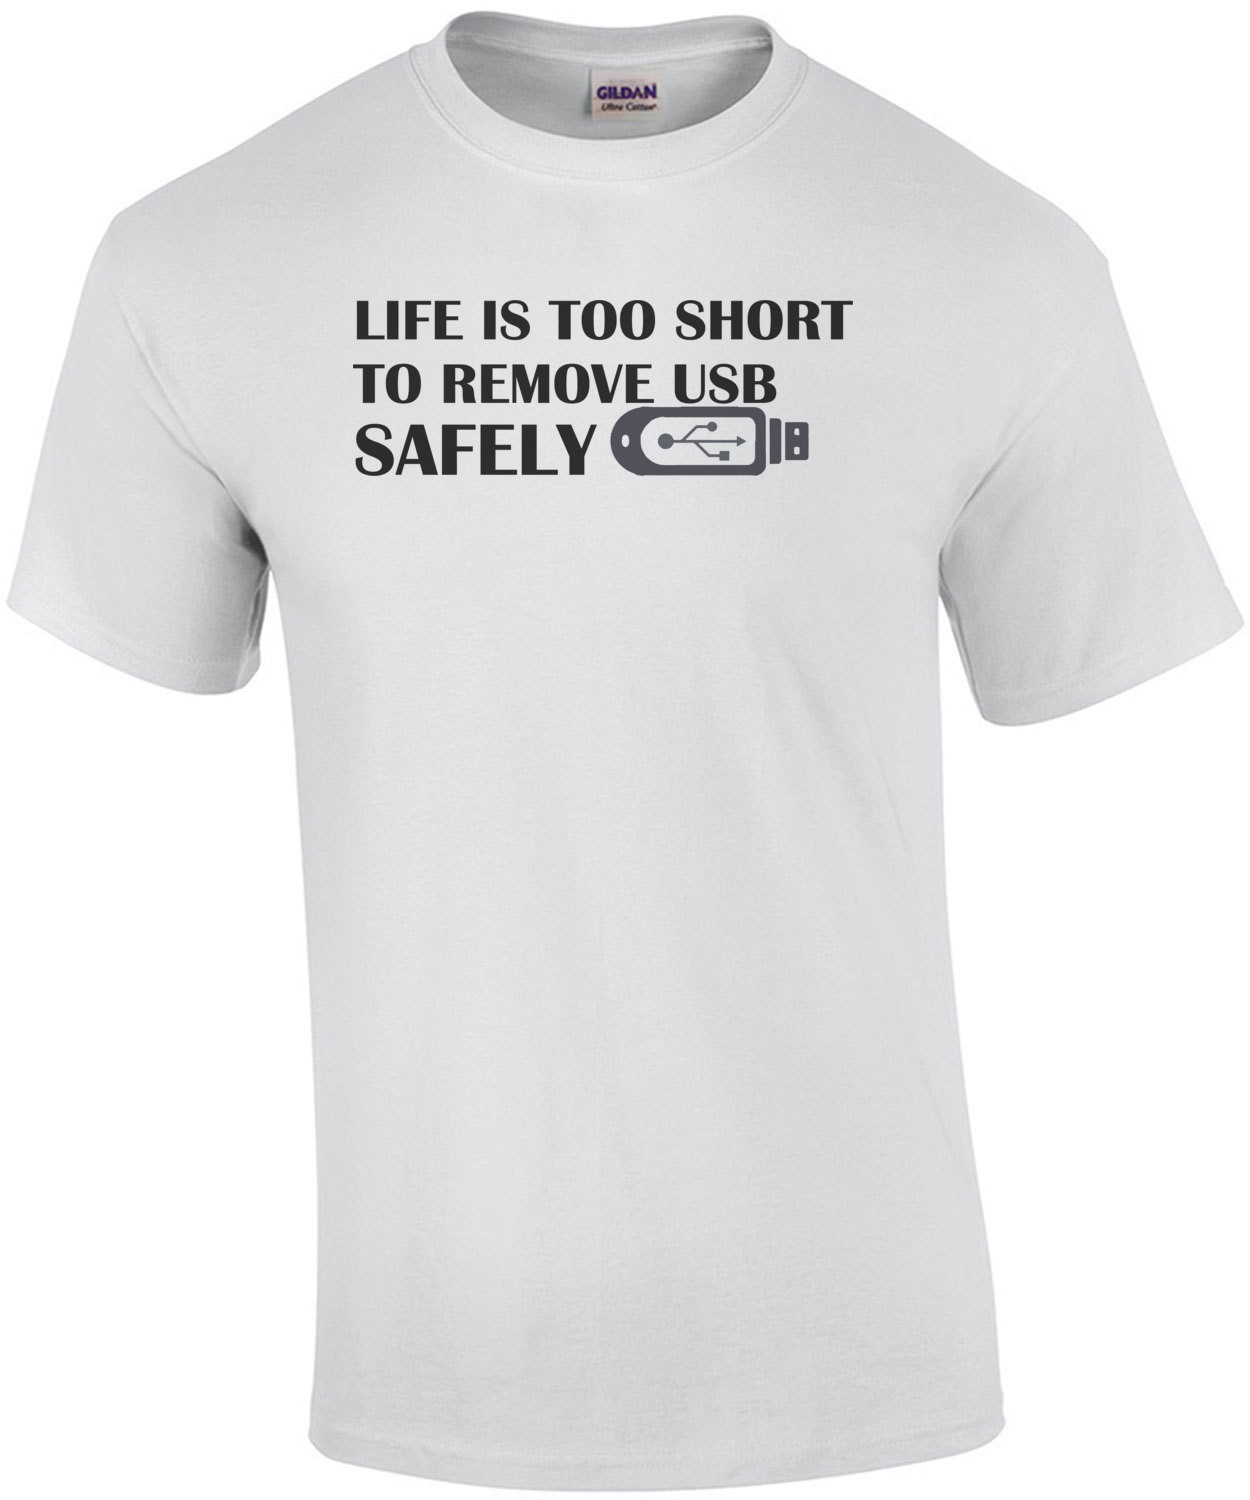 Life is too short to remove USB safely T-Shirt